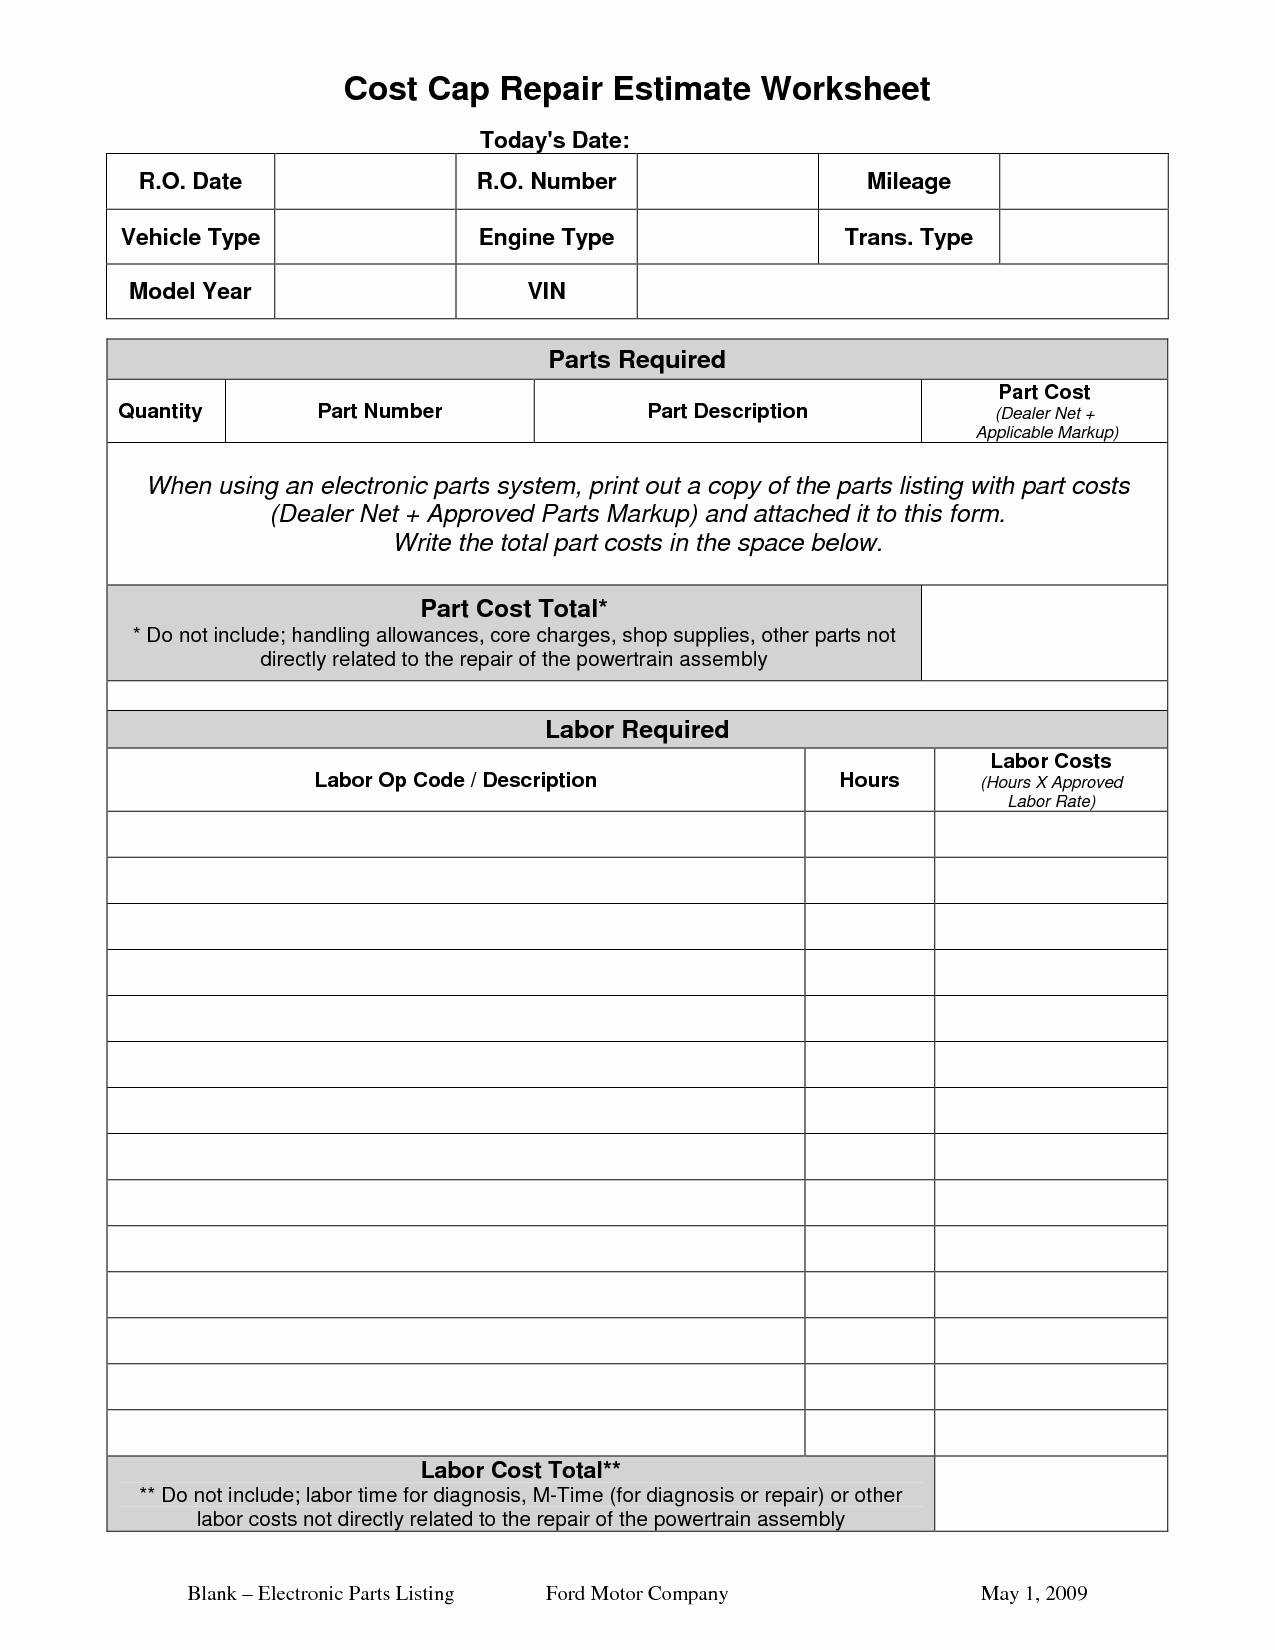 Markup and Discount Worksheet Also Auto Body Repair Estimate Template and Home Insurance Quote Sheet